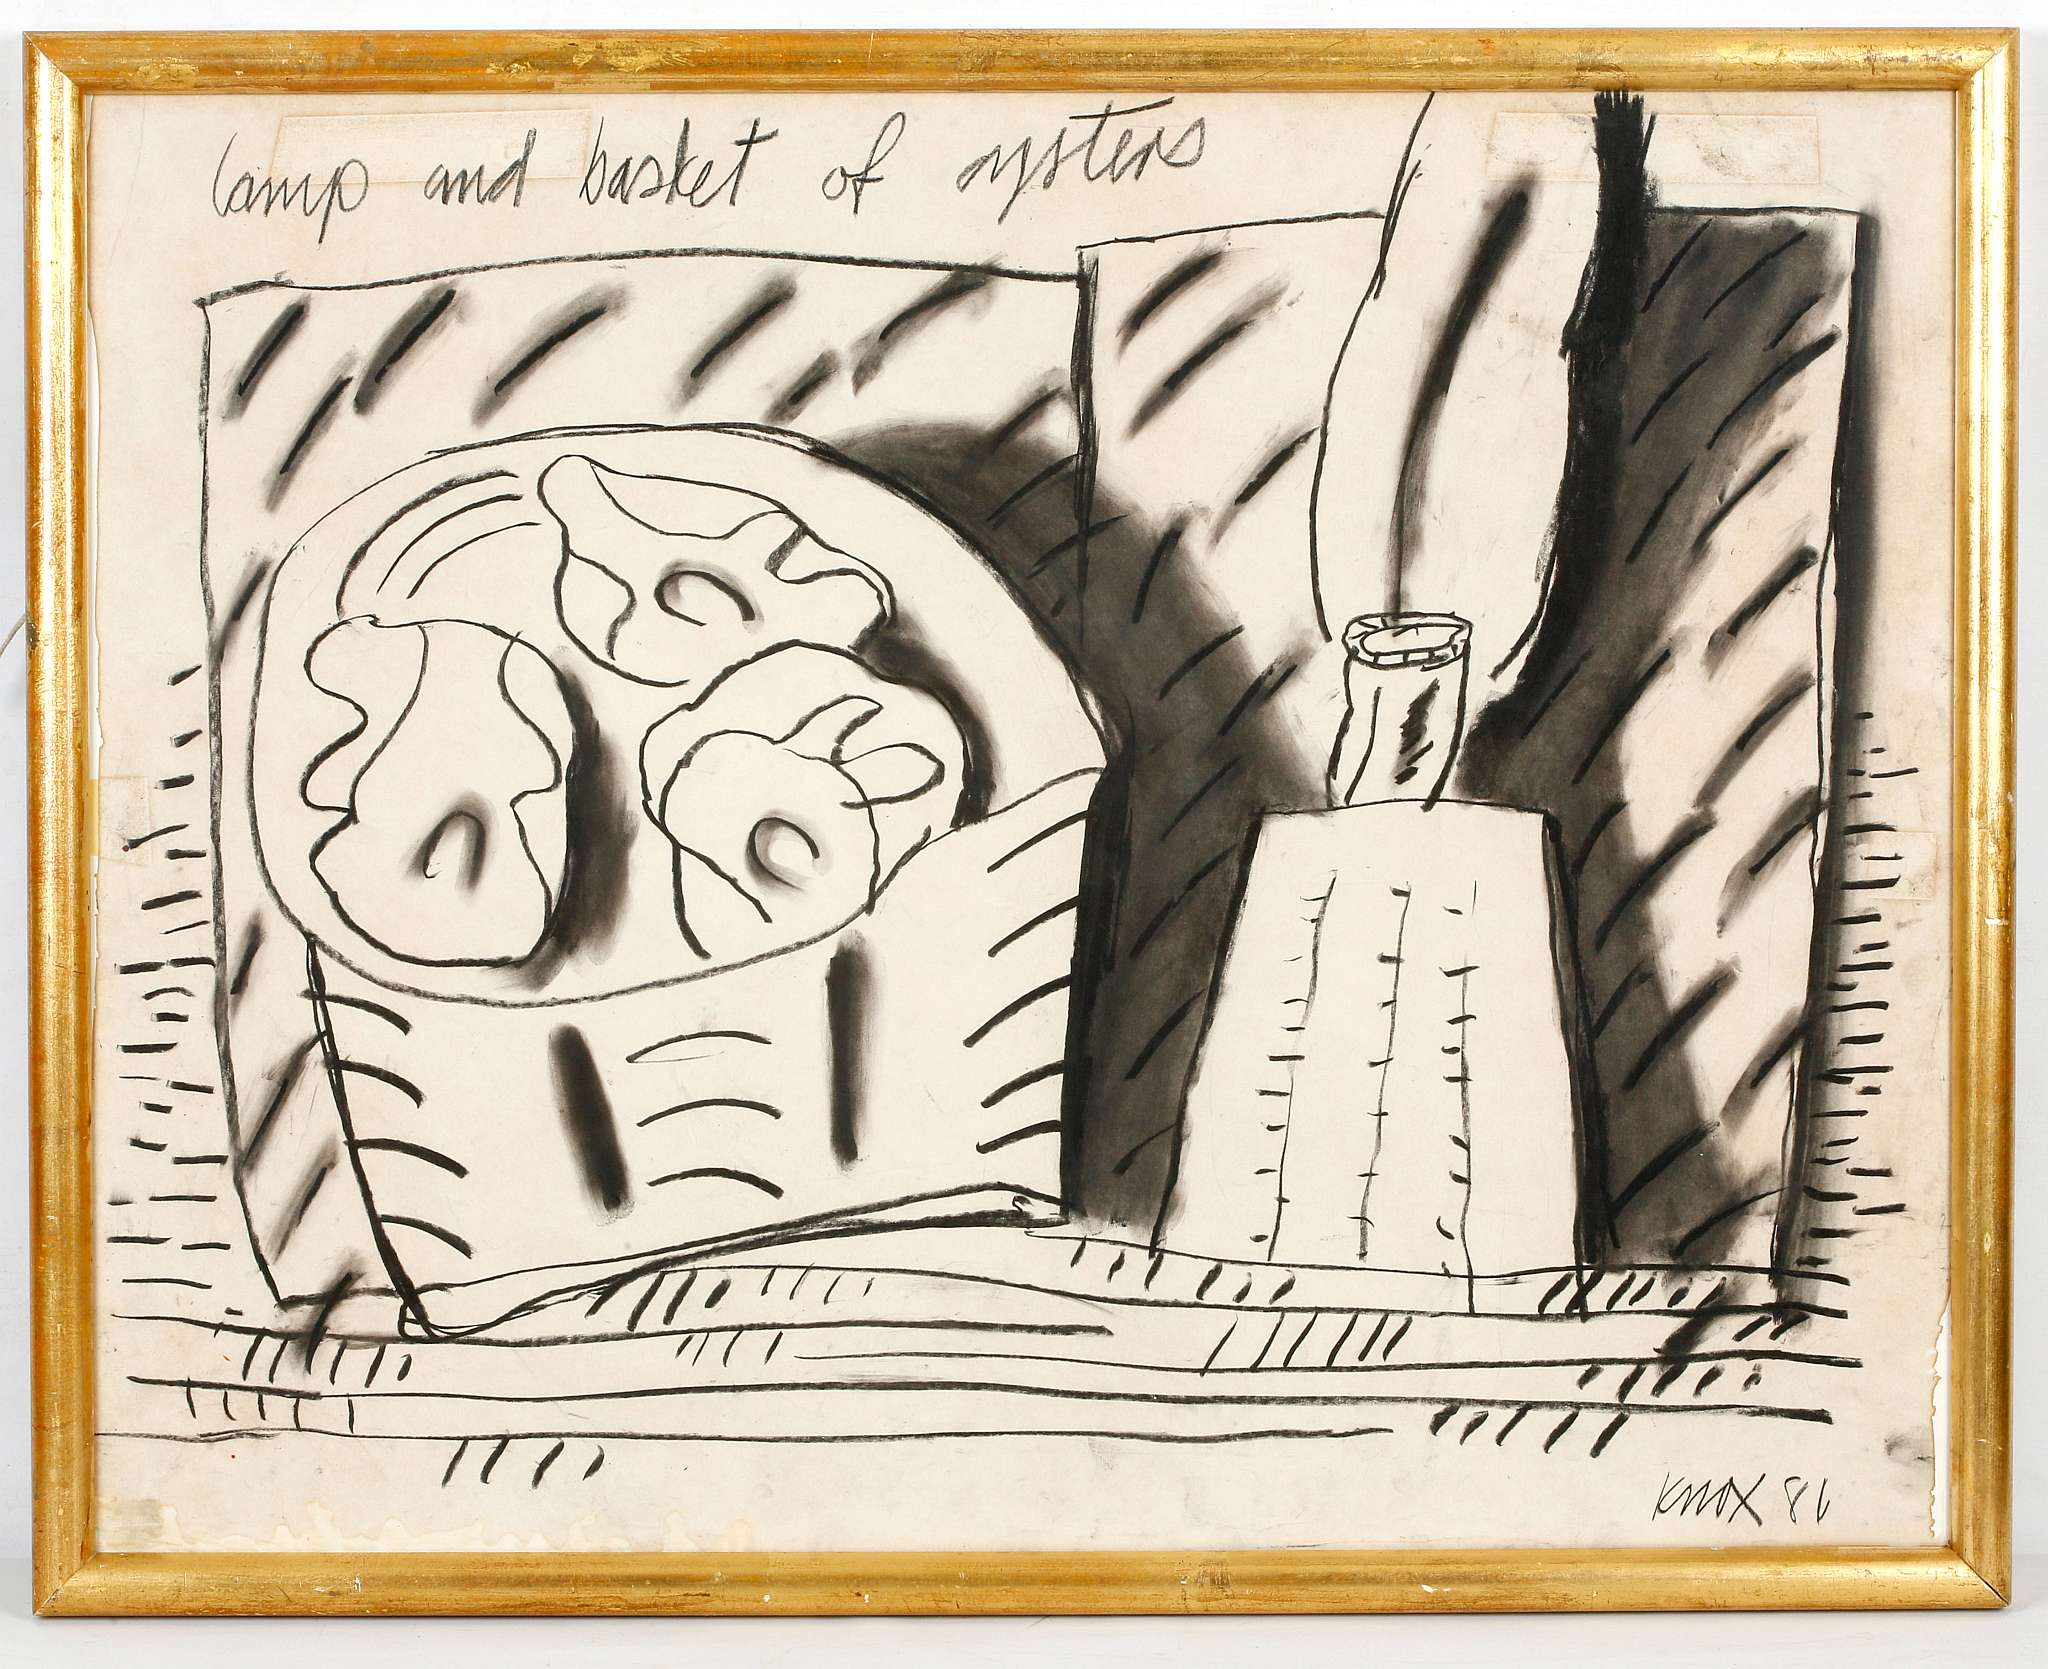 Jack (John) Knox 1936-2015, Scottish School, 'Lamp & Basket of Oysters', charcoal, inscribed, and